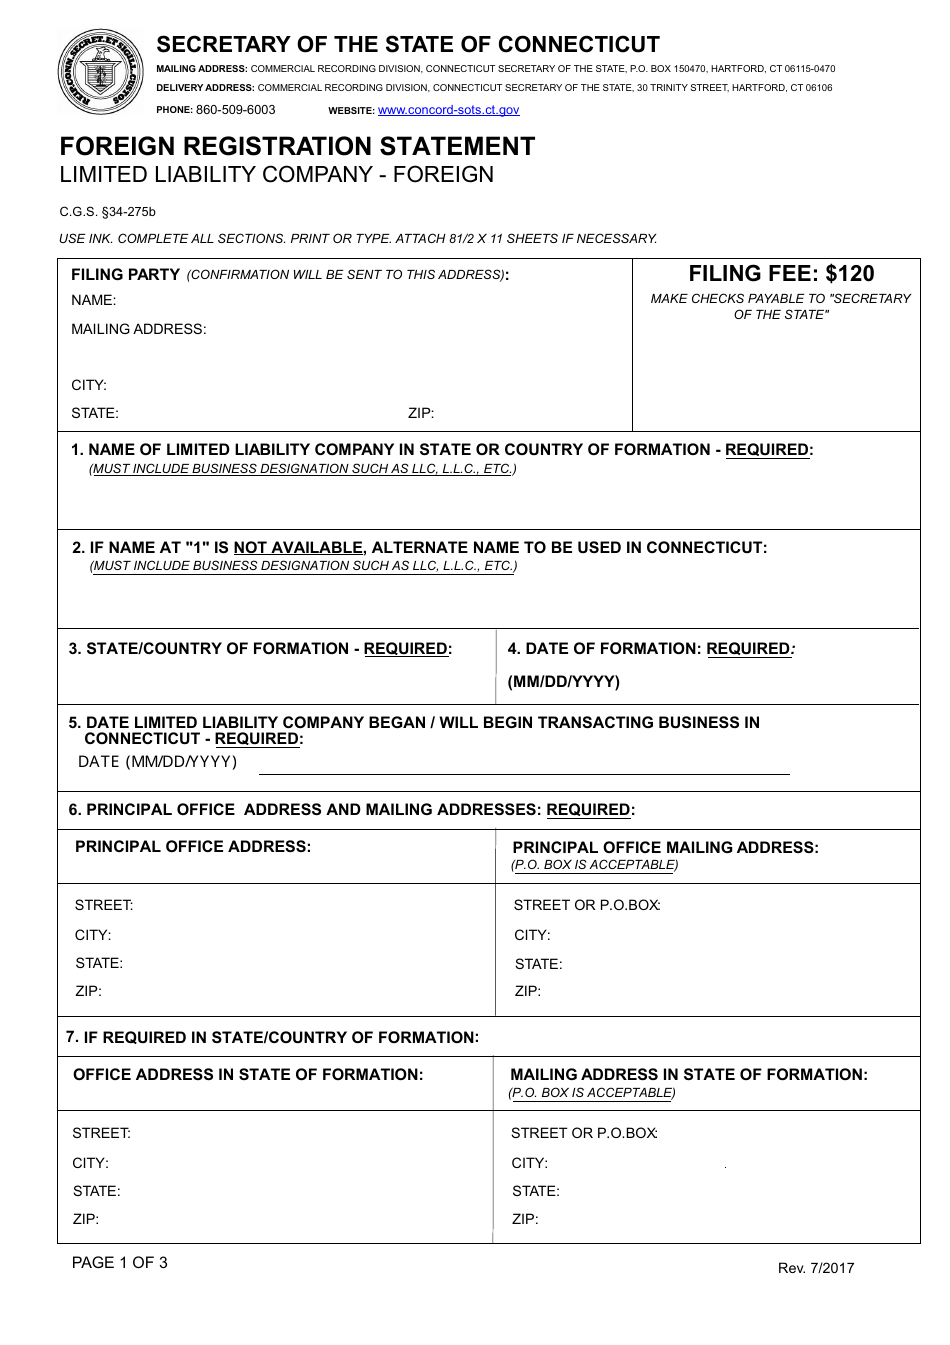 Foreign Registration Statement Form - Limited Liability Company - Foreign - Connecticut, Page 1